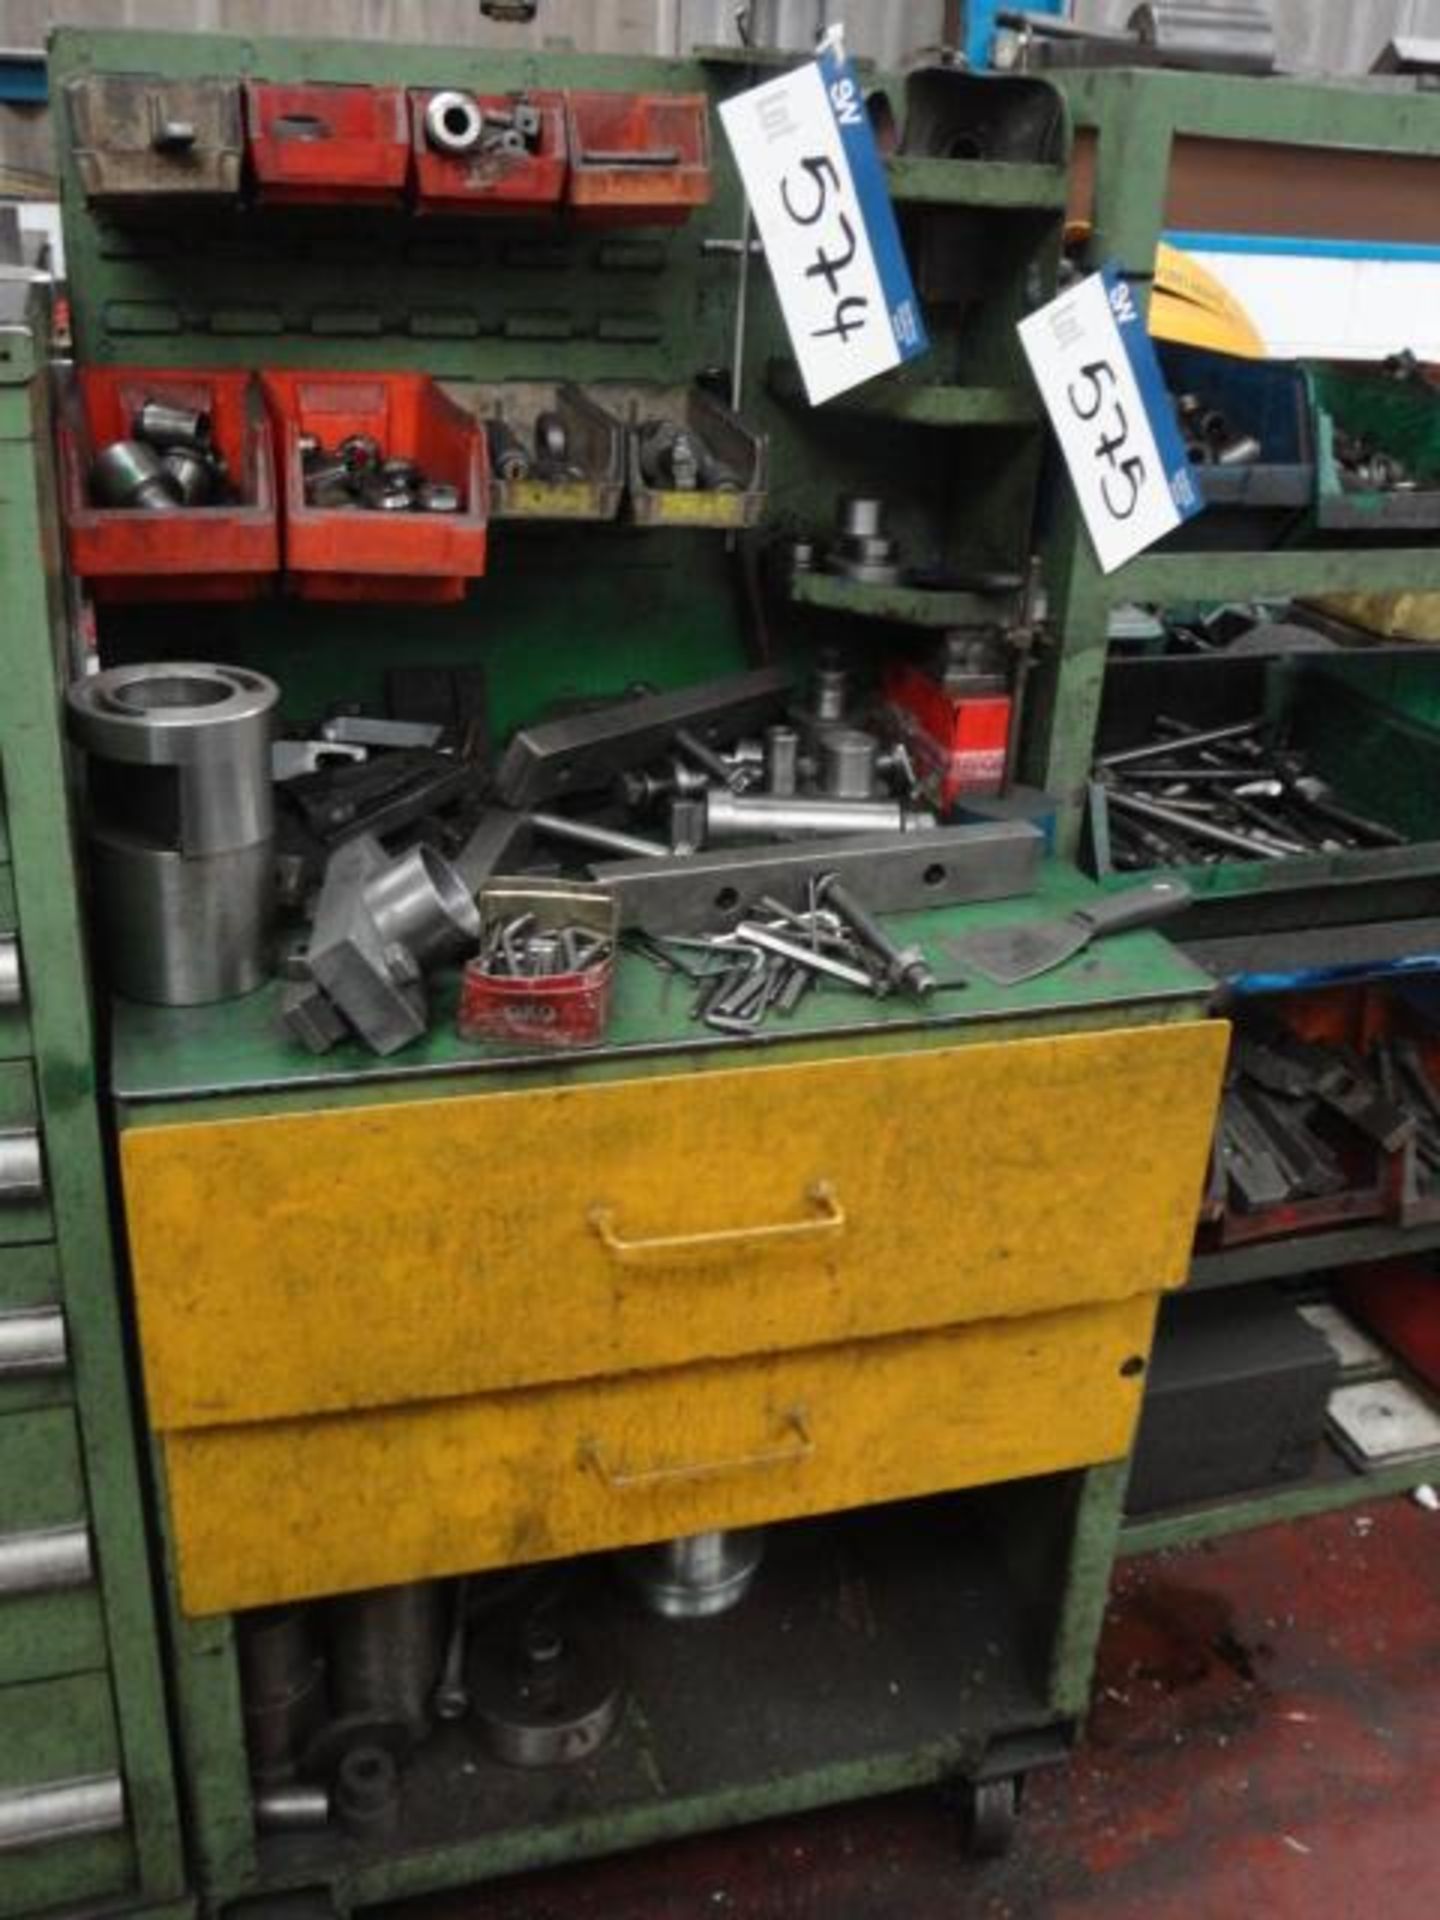 Multi-Compartment Workshop Cabinet, with contents including cutting tools, hand tools and trolley